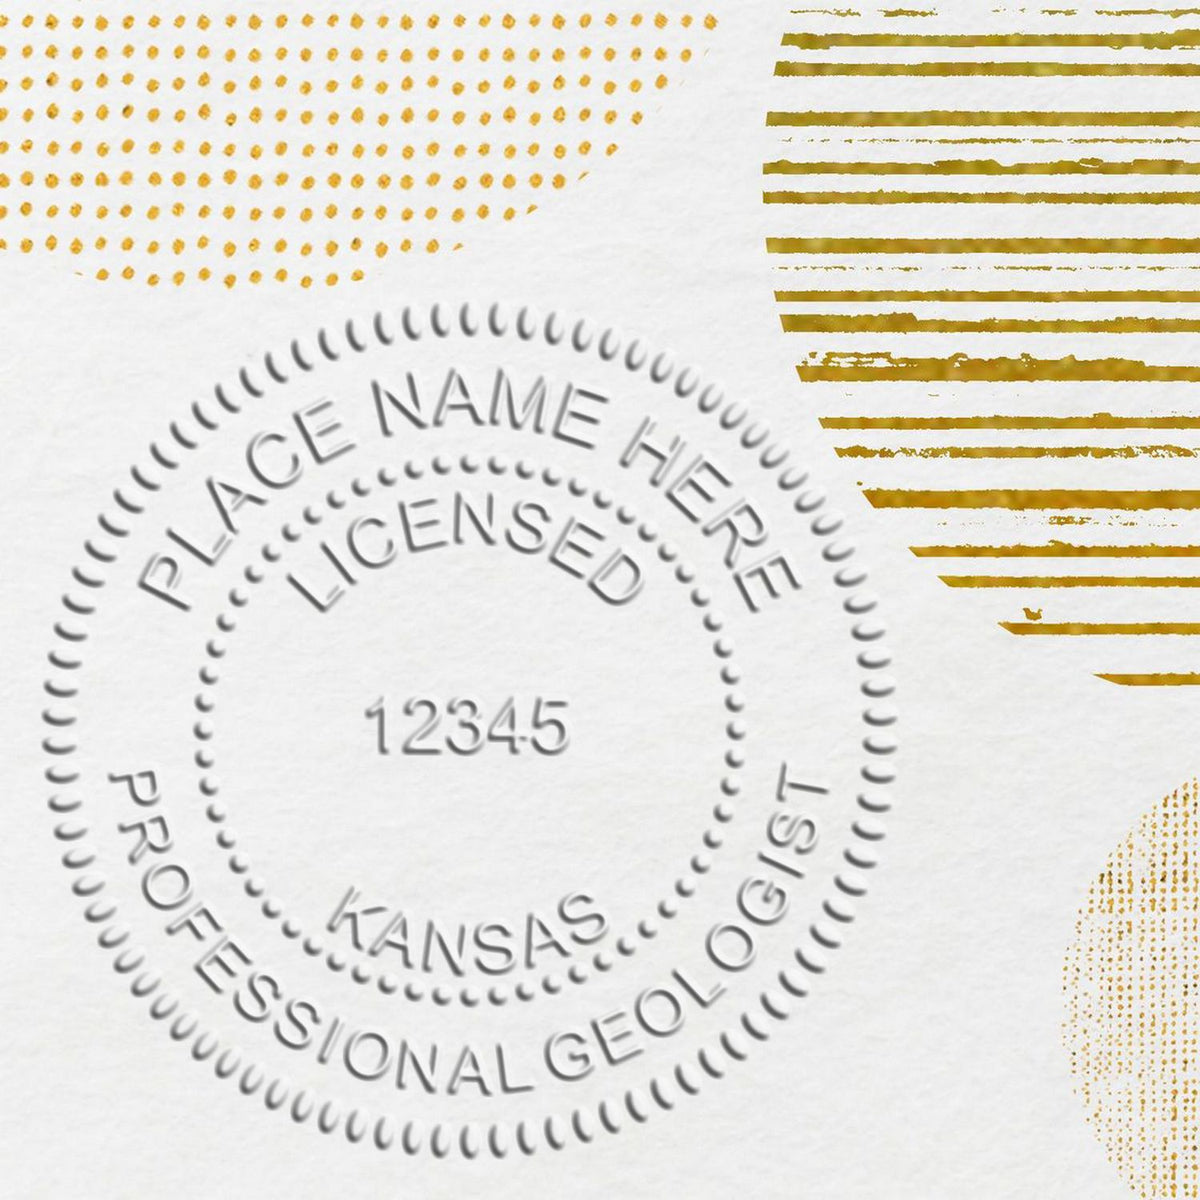 A stamped imprint of the State of Kansas Extended Long Reach Geologist Seal in this stylish lifestyle photo, setting the tone for a unique and personalized product.